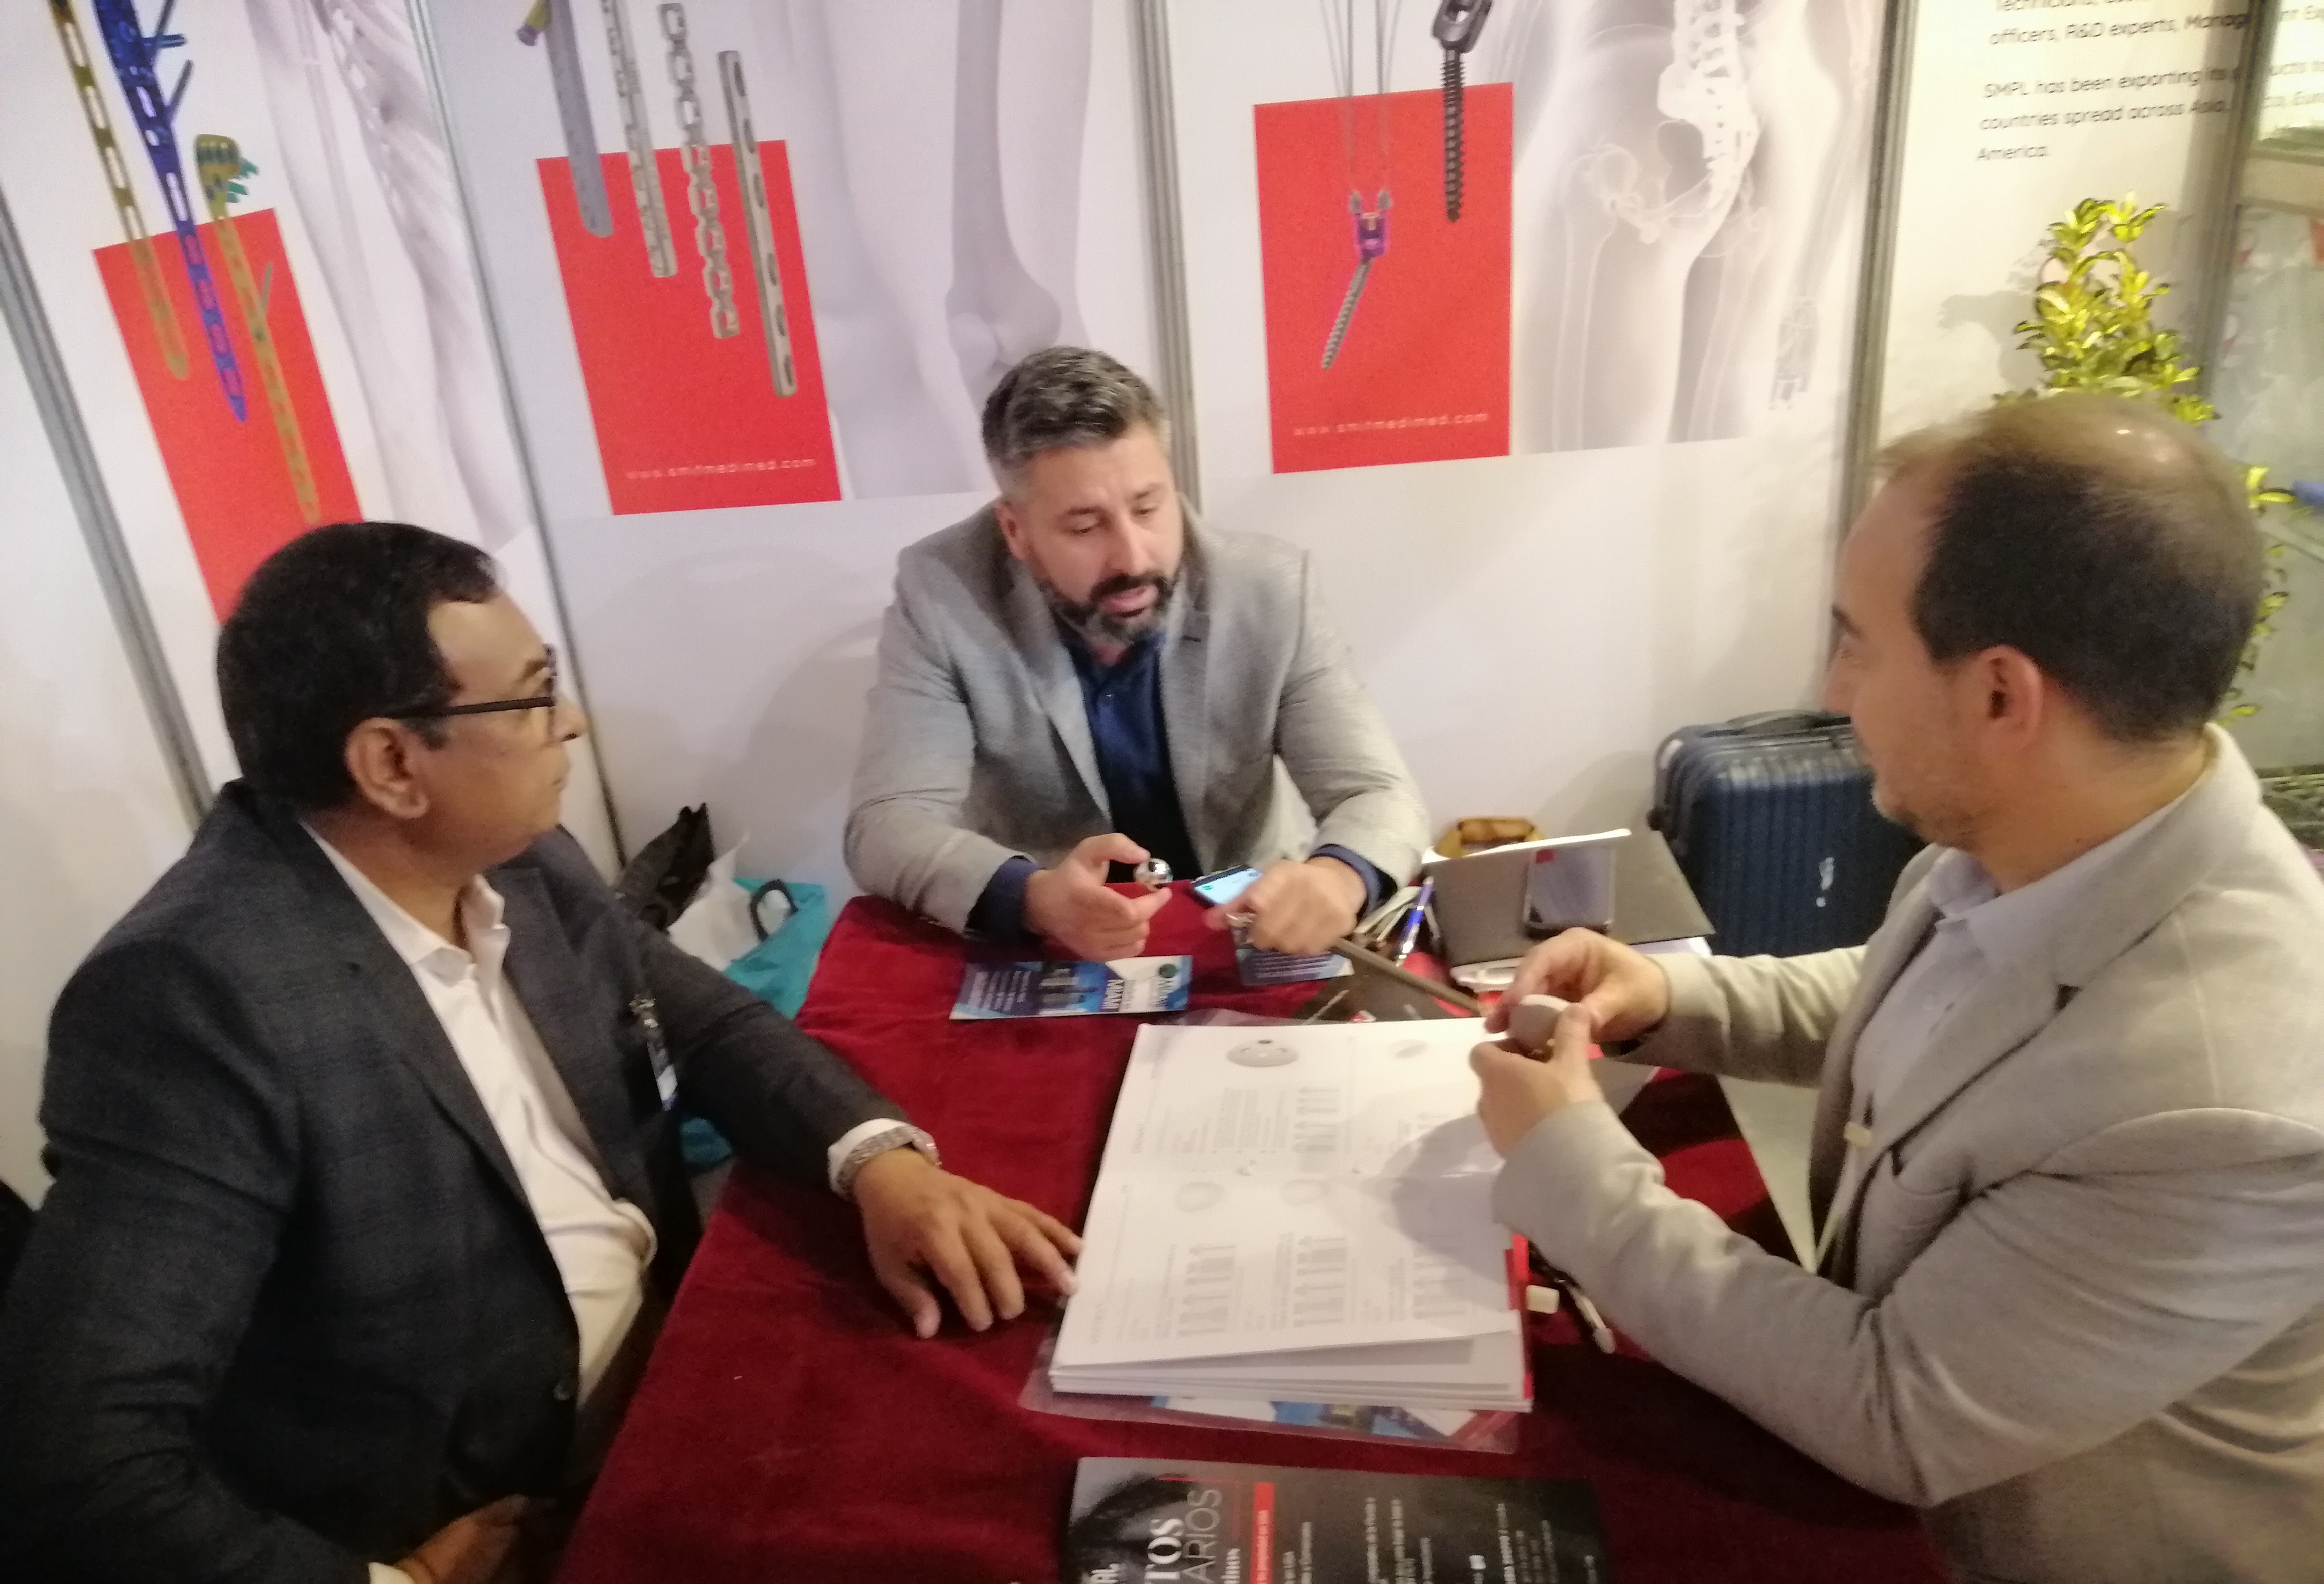 ExpoMedical_2019 conference - Visitor are showing SMPL products